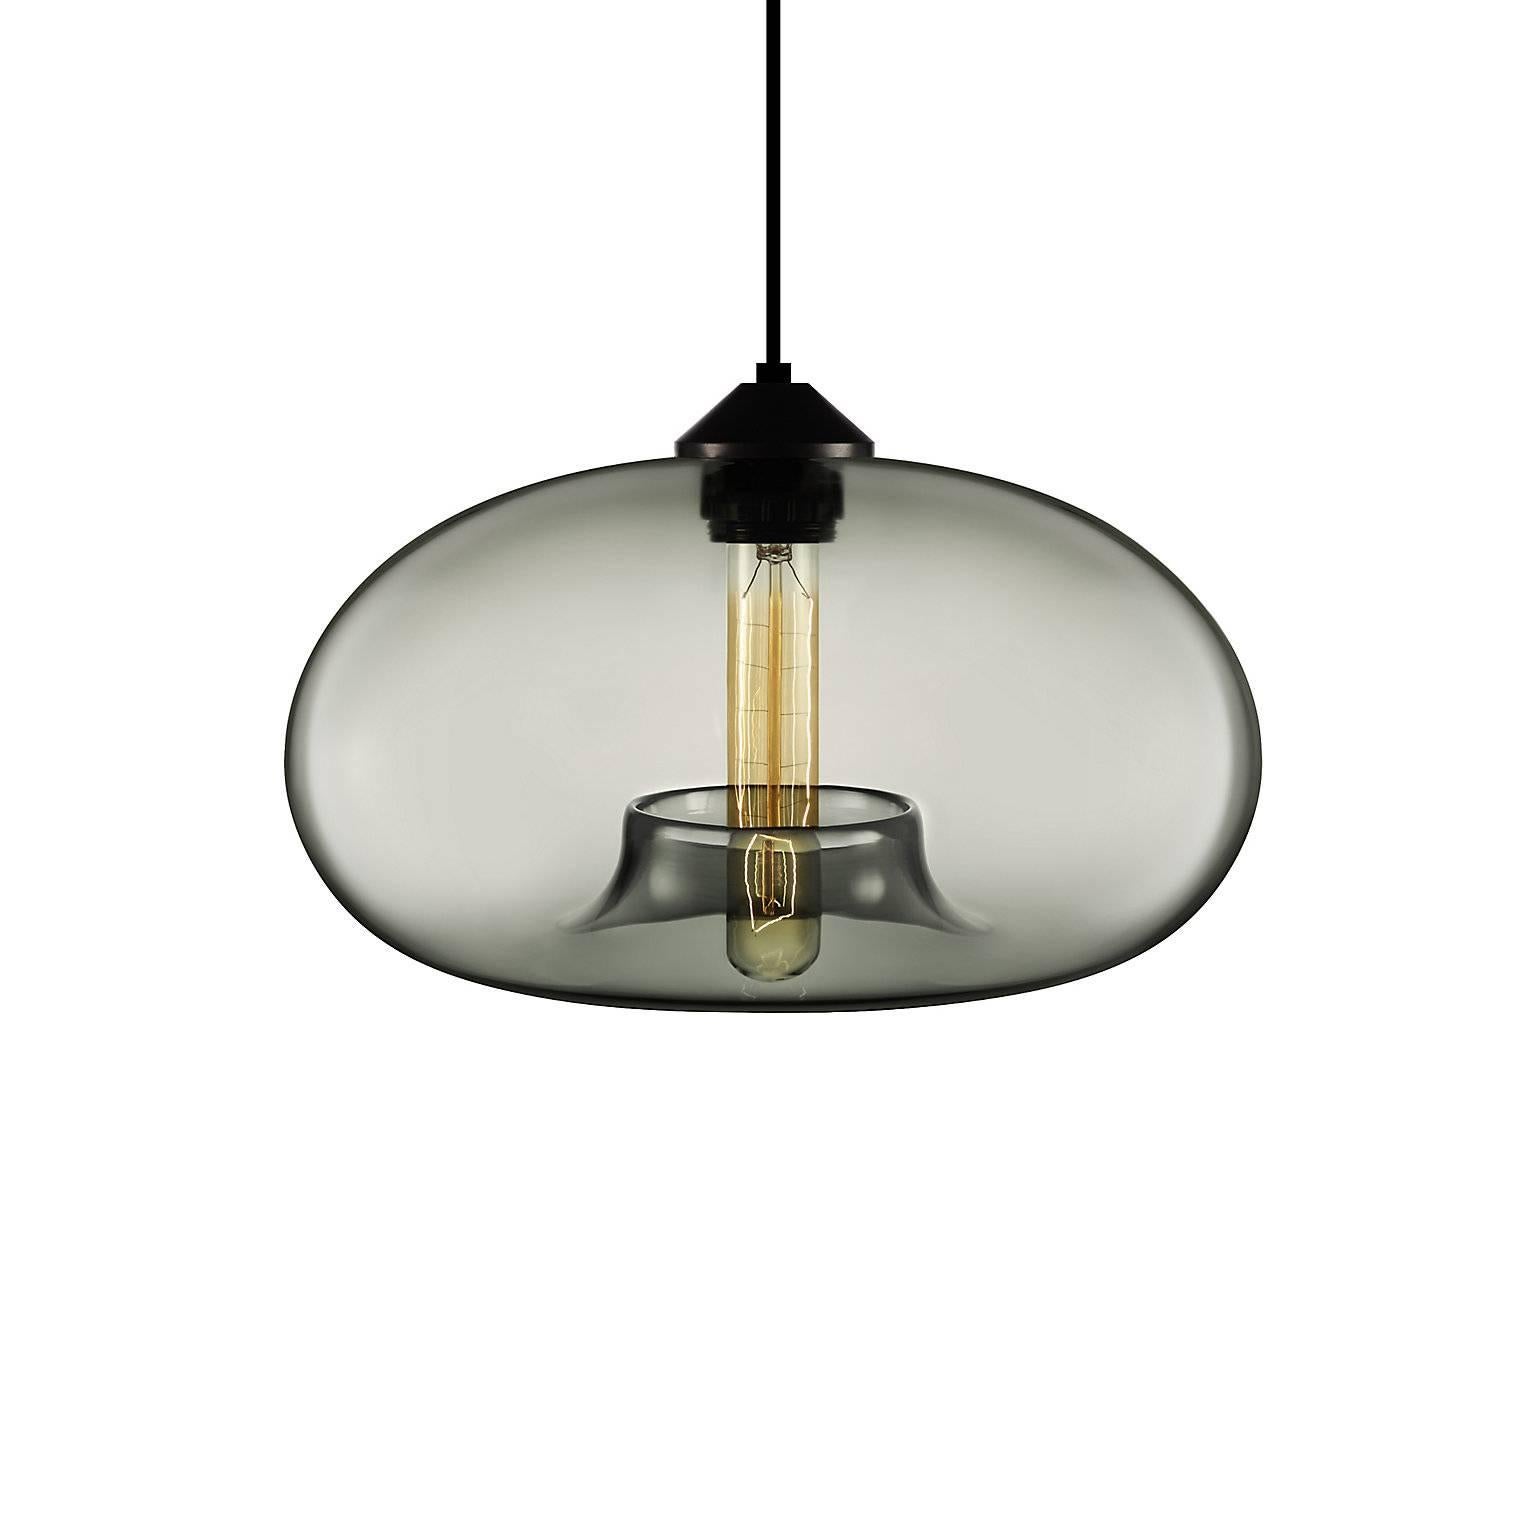 Conjuring the awe of the northern lights, the Aurora pendant’s distinctive shape captures the craftsmanship and artistry of hand-blown glass. Every single glass pendant light that comes from Niche is hand-blown by real human beings in a